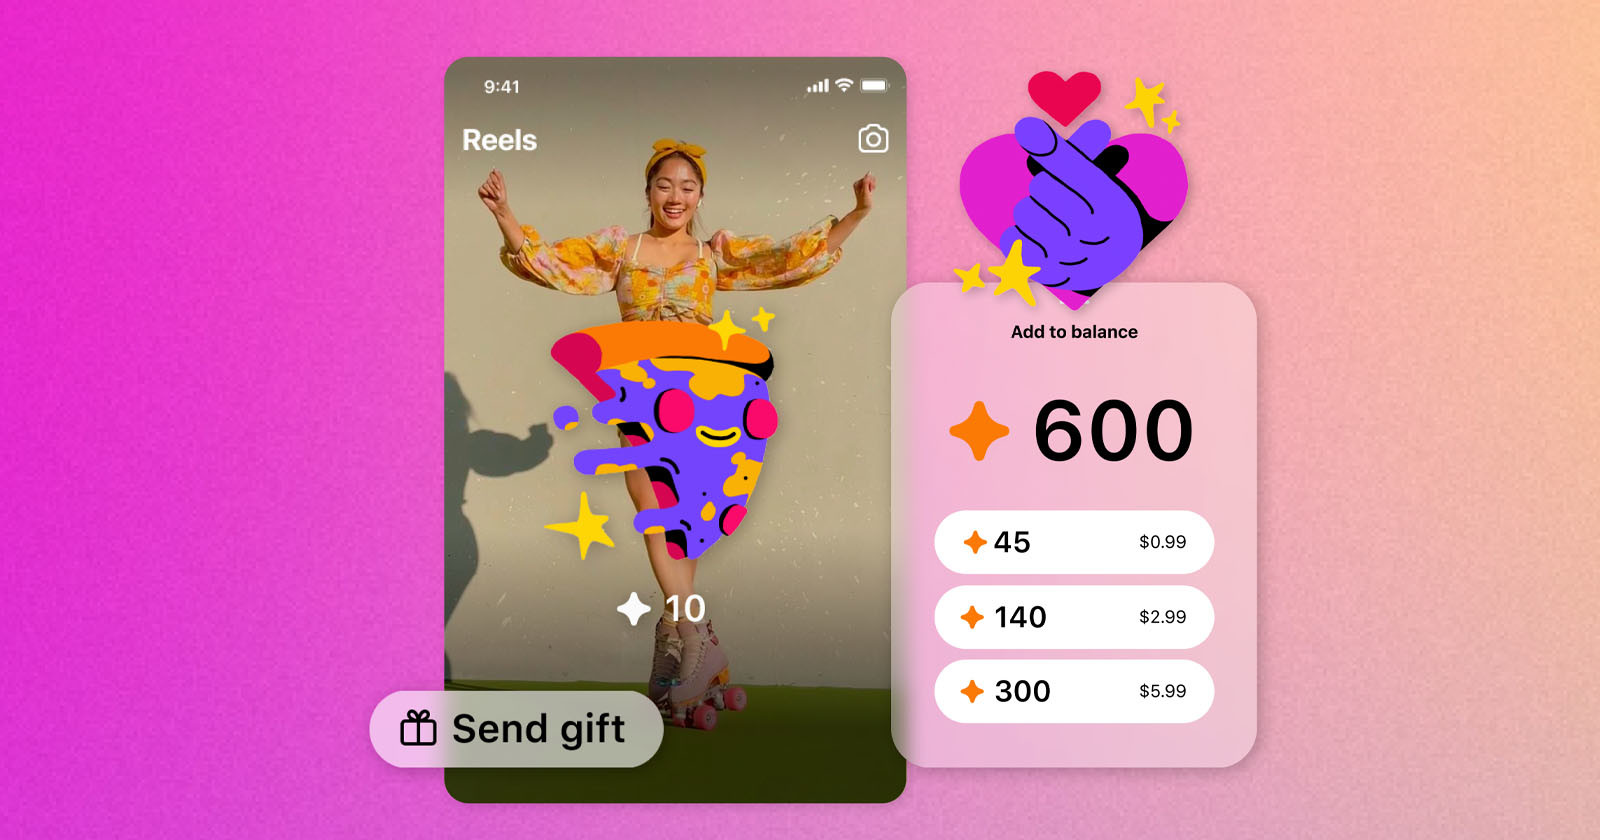 Instagrams Expanded Gifts System Pays Creators, But it isnt Simple